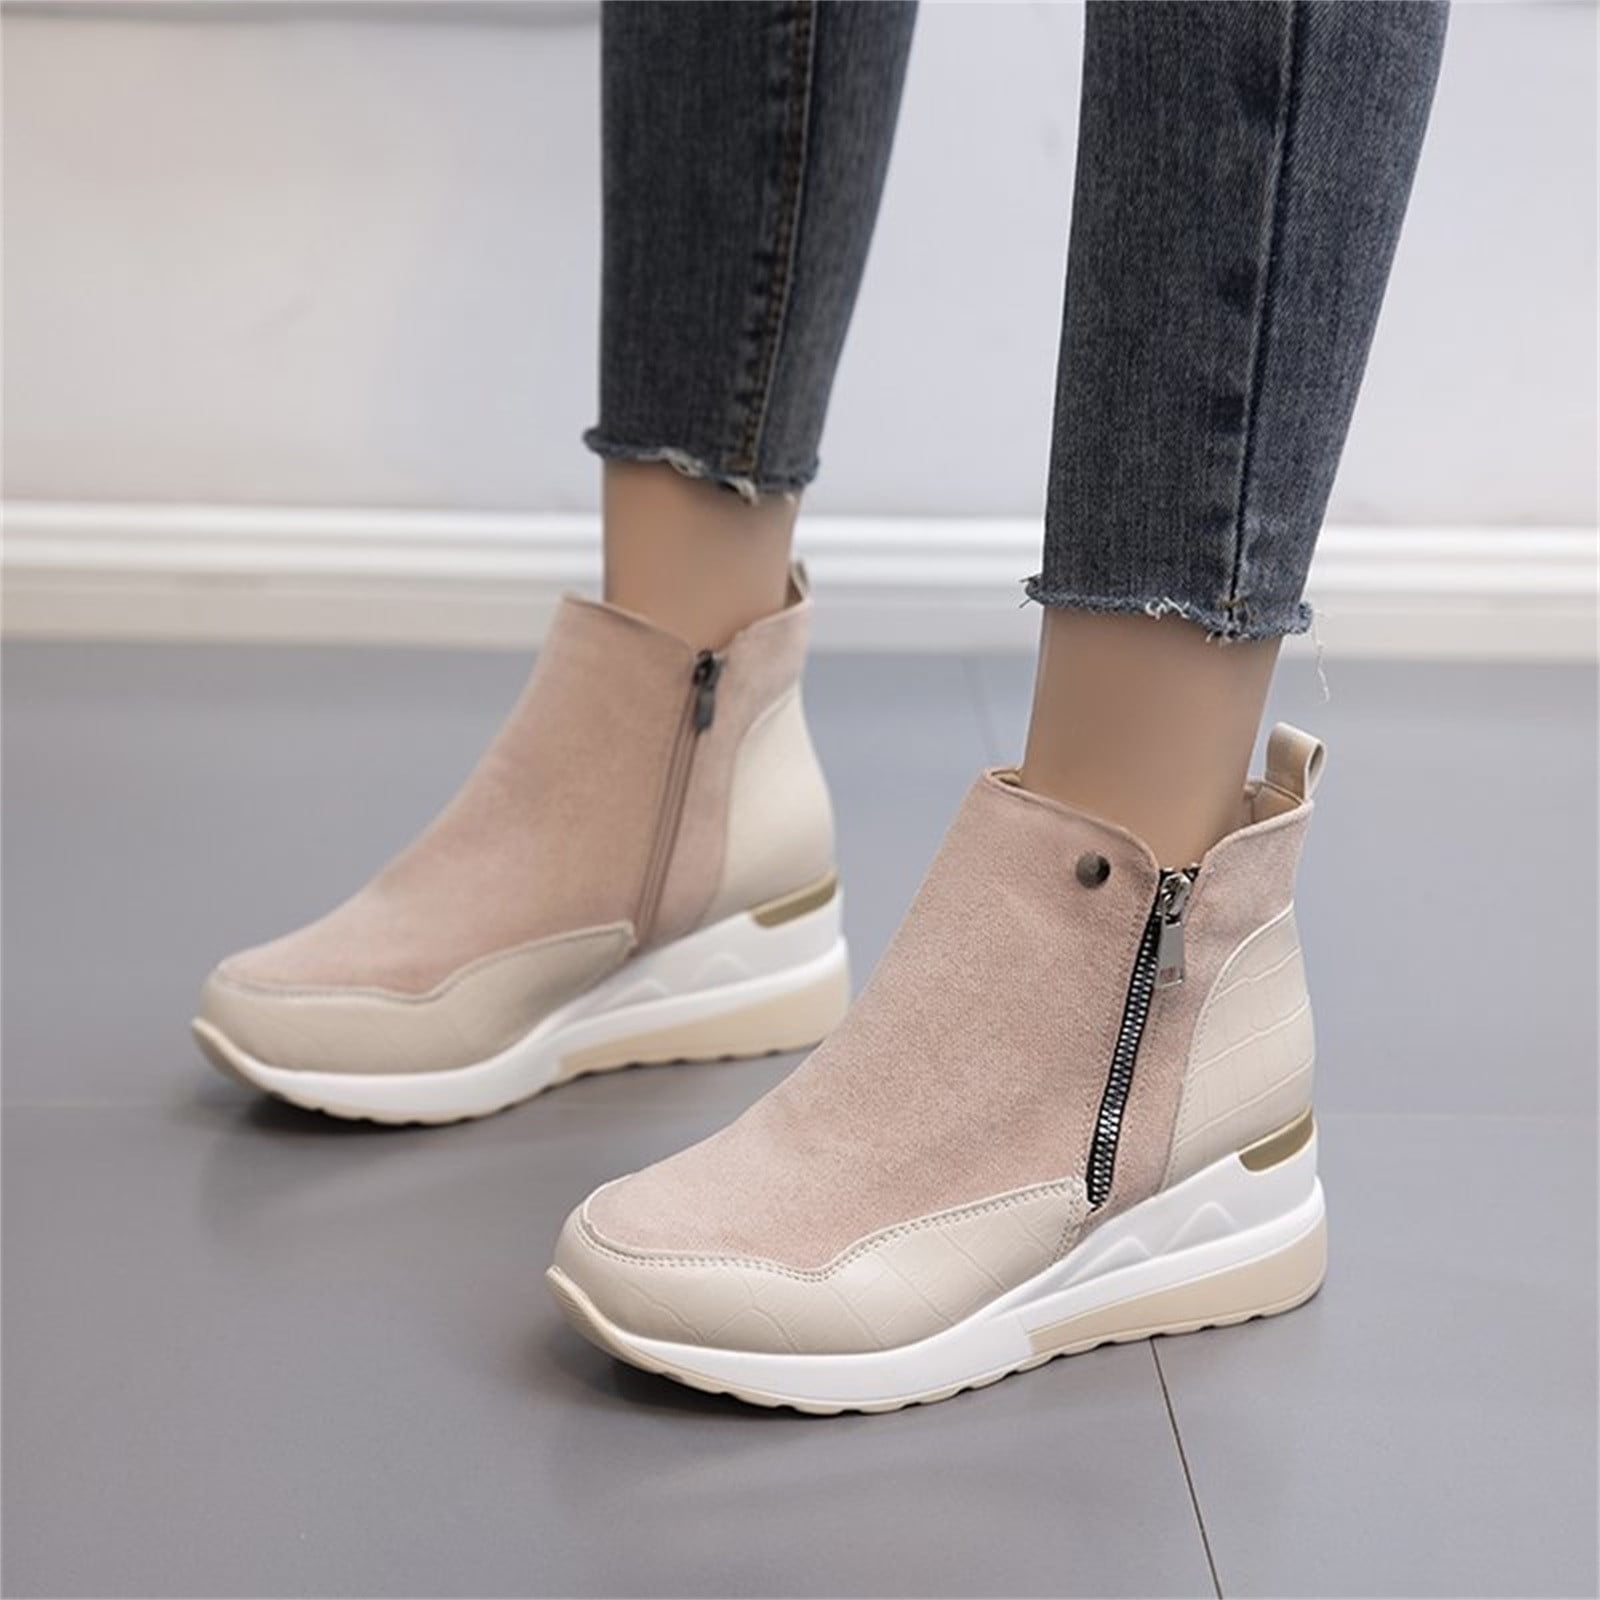 Womens Zipper Ankle Boot Pull On Tassel Detail Casual Low Heel Shoes Booties 